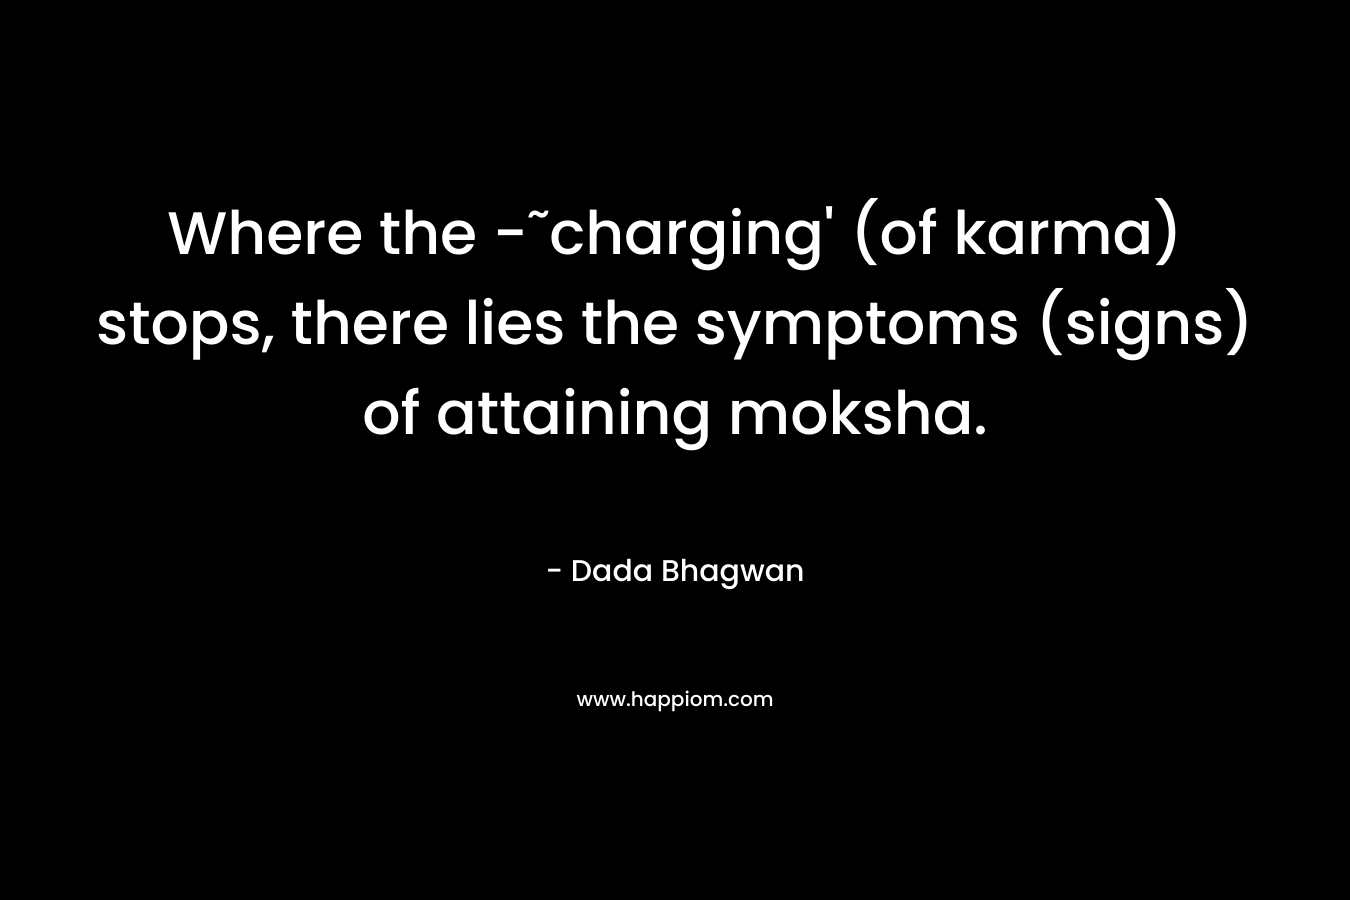 Where the -˜charging' (of karma) stops, there lies the symptoms (signs) of attaining moksha.